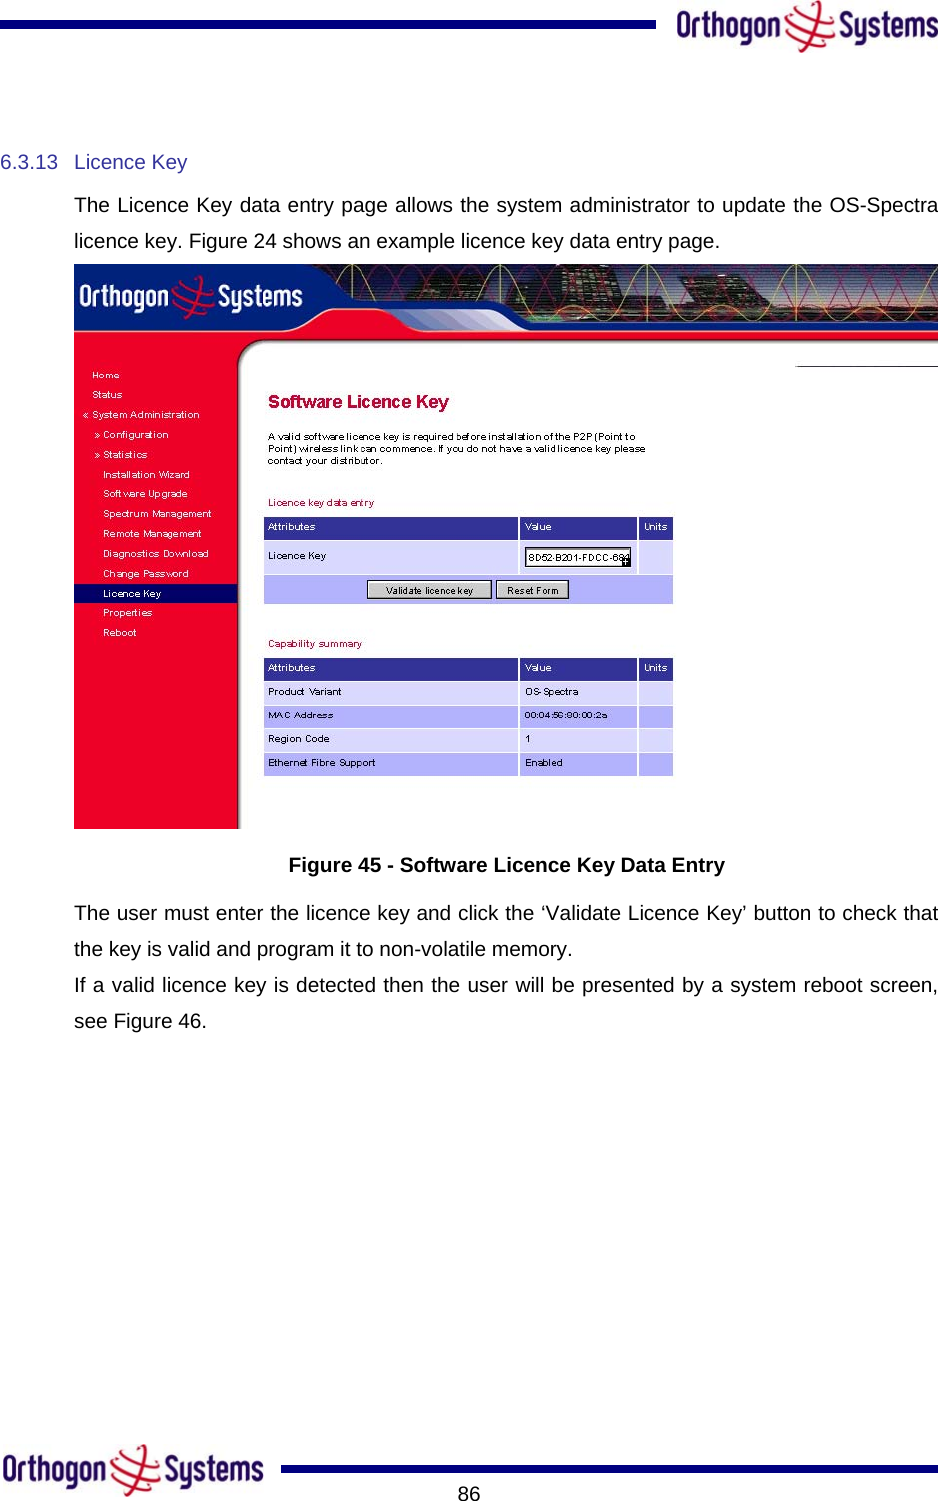       86 6.3.13 Licence Key The Licence Key data entry page allows the system administrator to update the OS-Spectra licence key. Figure 24 shows an example licence key data entry page.  Figure 45 - Software Licence Key Data Entry The user must enter the licence key and click the ‘Validate Licence Key’ button to check that the key is valid and program it to non-volatile memory. If a valid licence key is detected then the user will be presented by a system reboot screen, see Figure 46. 